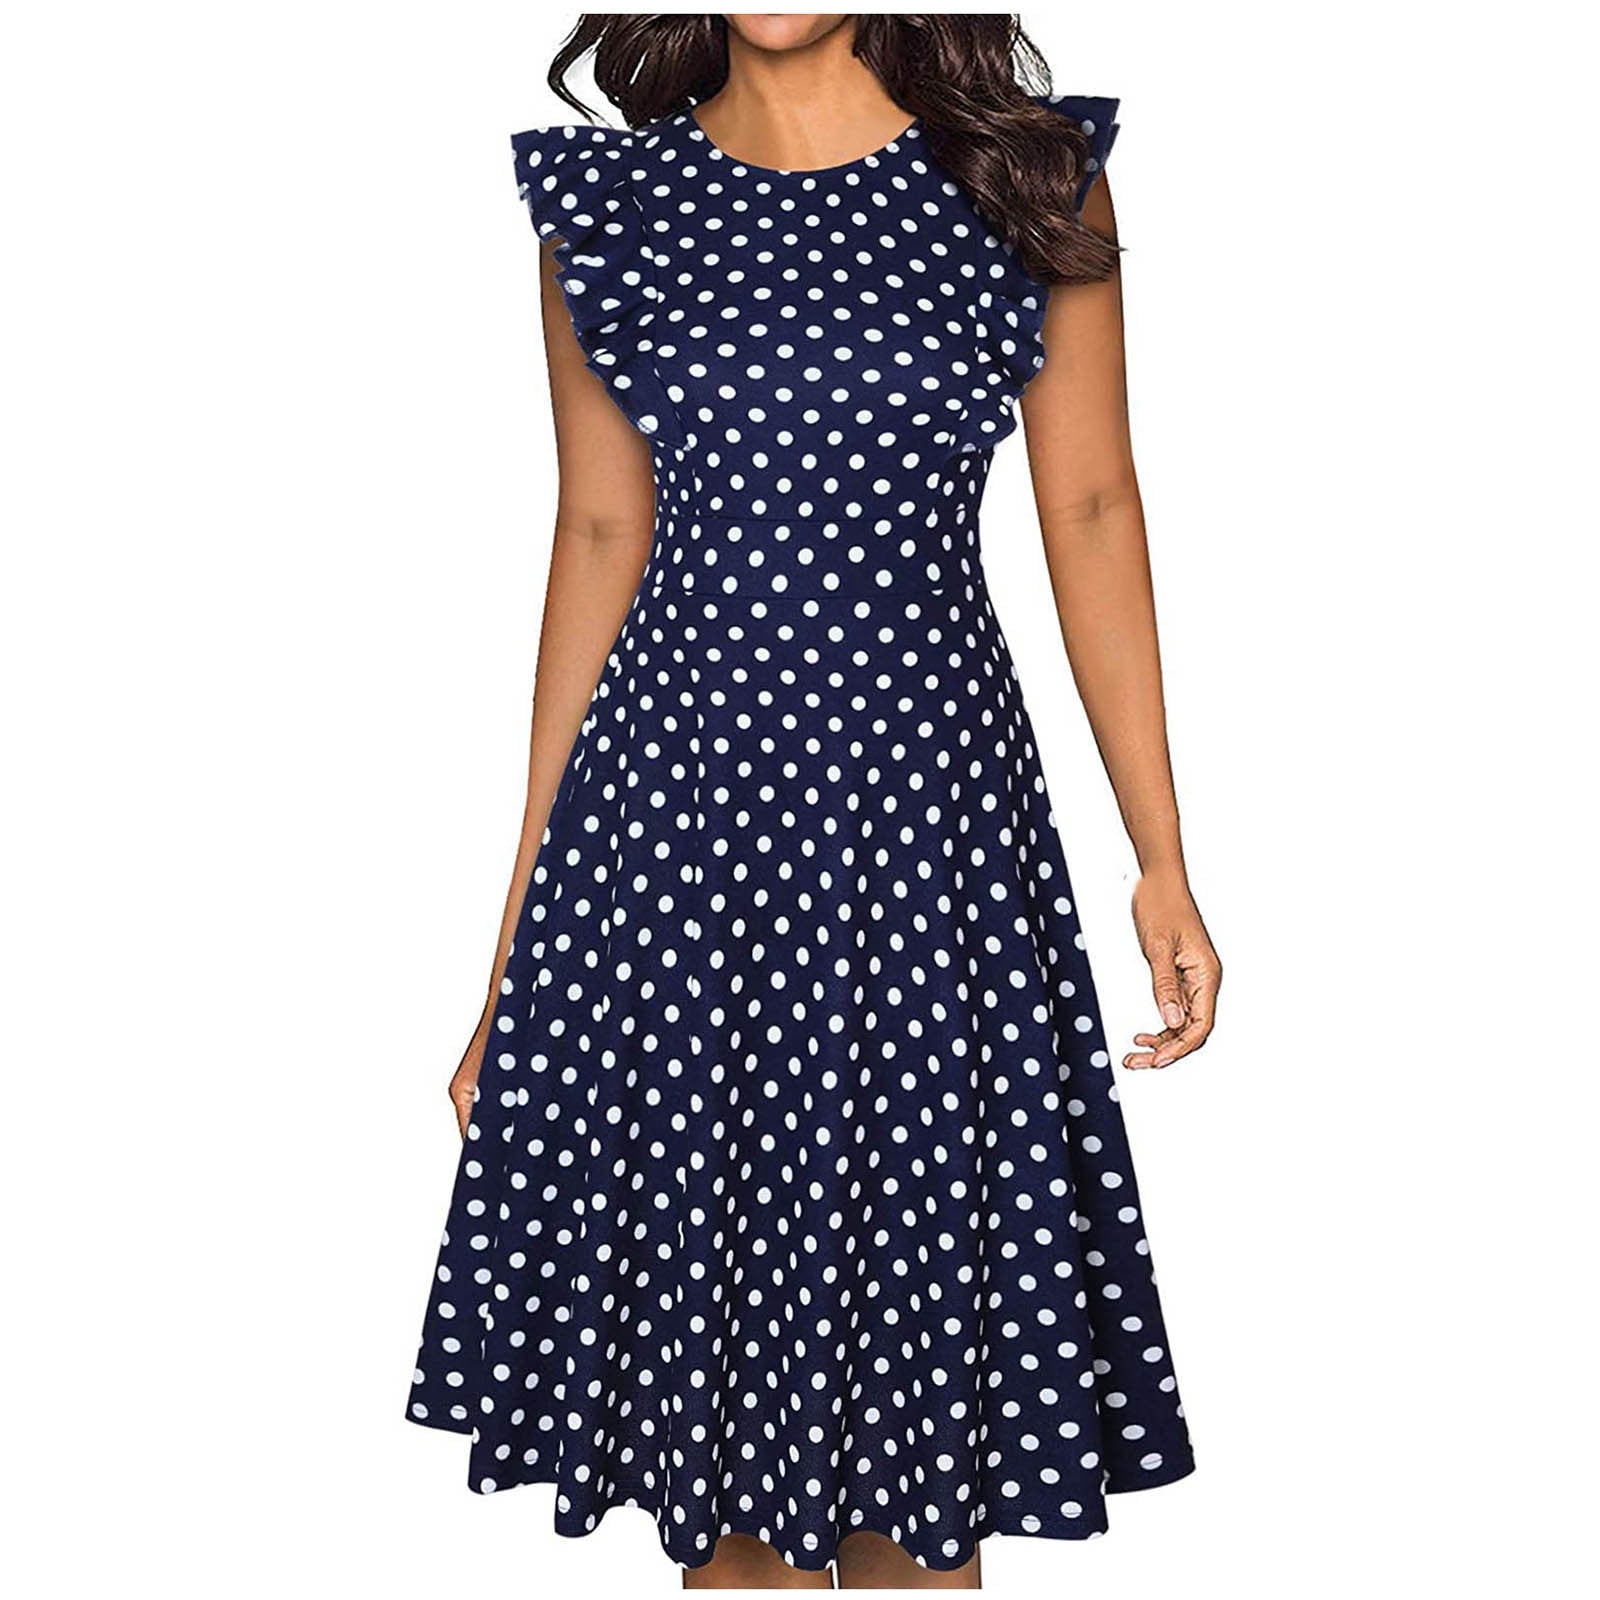 Dress for Women,Women's V Neck Vintage Ruffle Floral Flared A Line Swing Casual Cocktail Party Dresses 